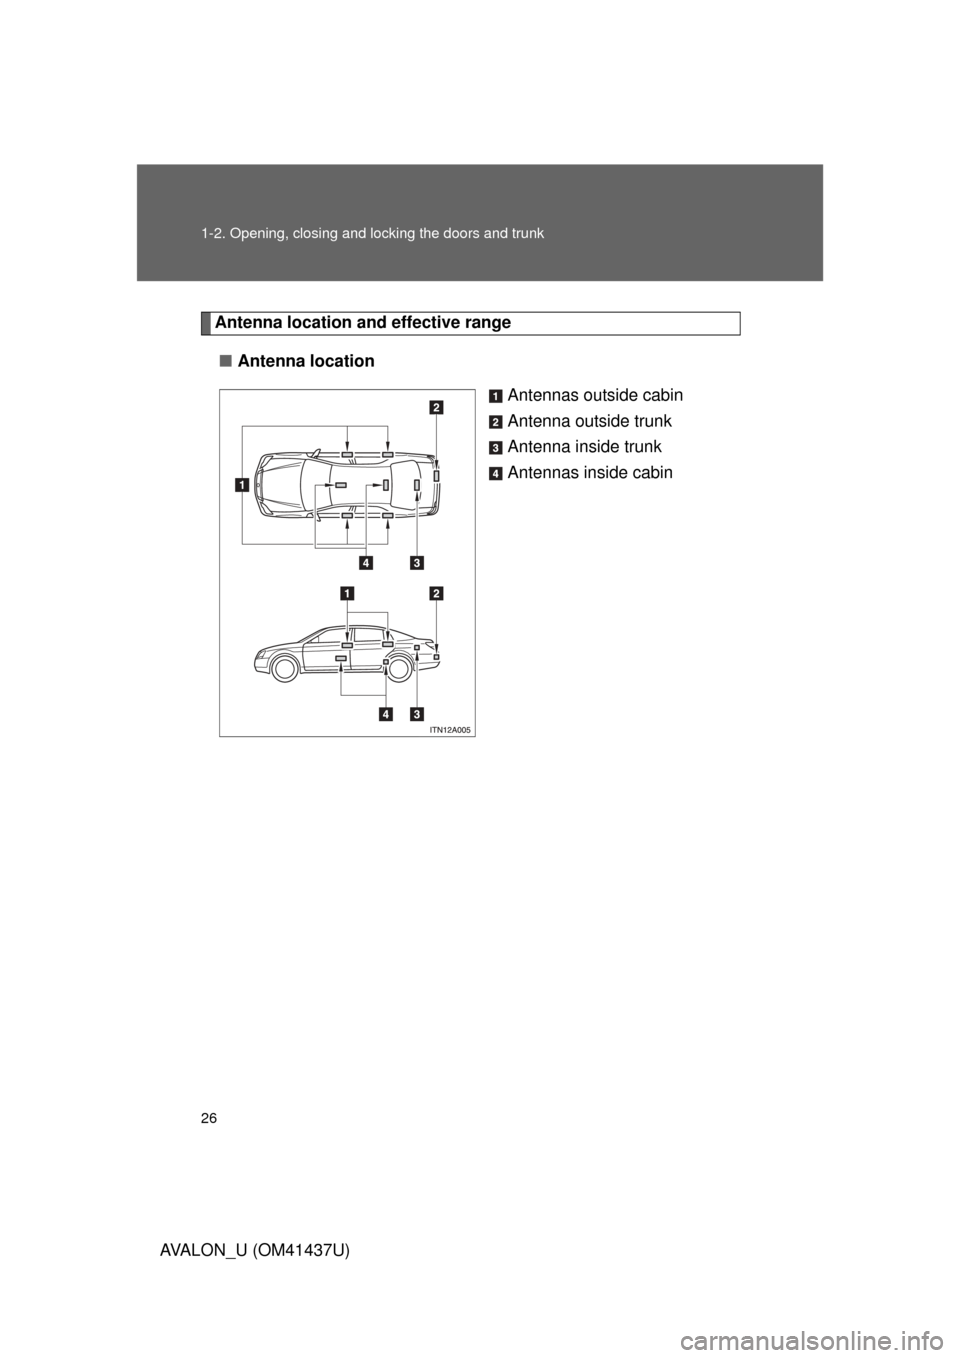 TOYOTA AVALON 2010 XX30 / 3.G Owners Manual 26 1-2. Opening, closing and locking the doors and trunk
AVALON_U (OM41437U)
Antenna location and effective range
■ Antenna location
Antennas outside cabin
Antenna outside trunk
Antenna inside trunk